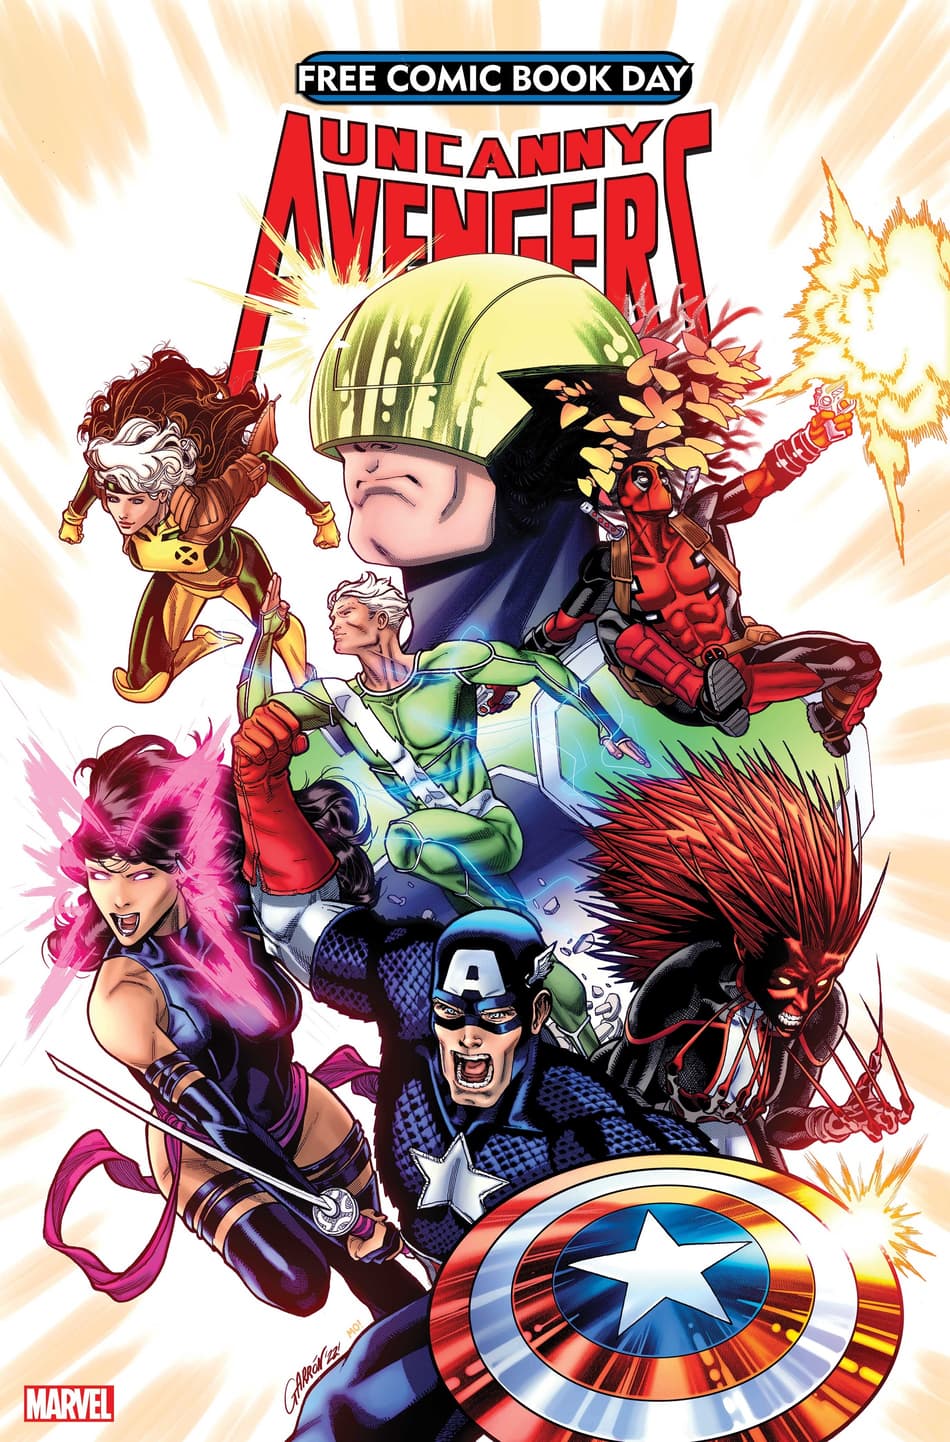 Cover to FREE COMIC BOOK DAY 2023: AVENGERS/X-MEN #1 by Javier Garrón.